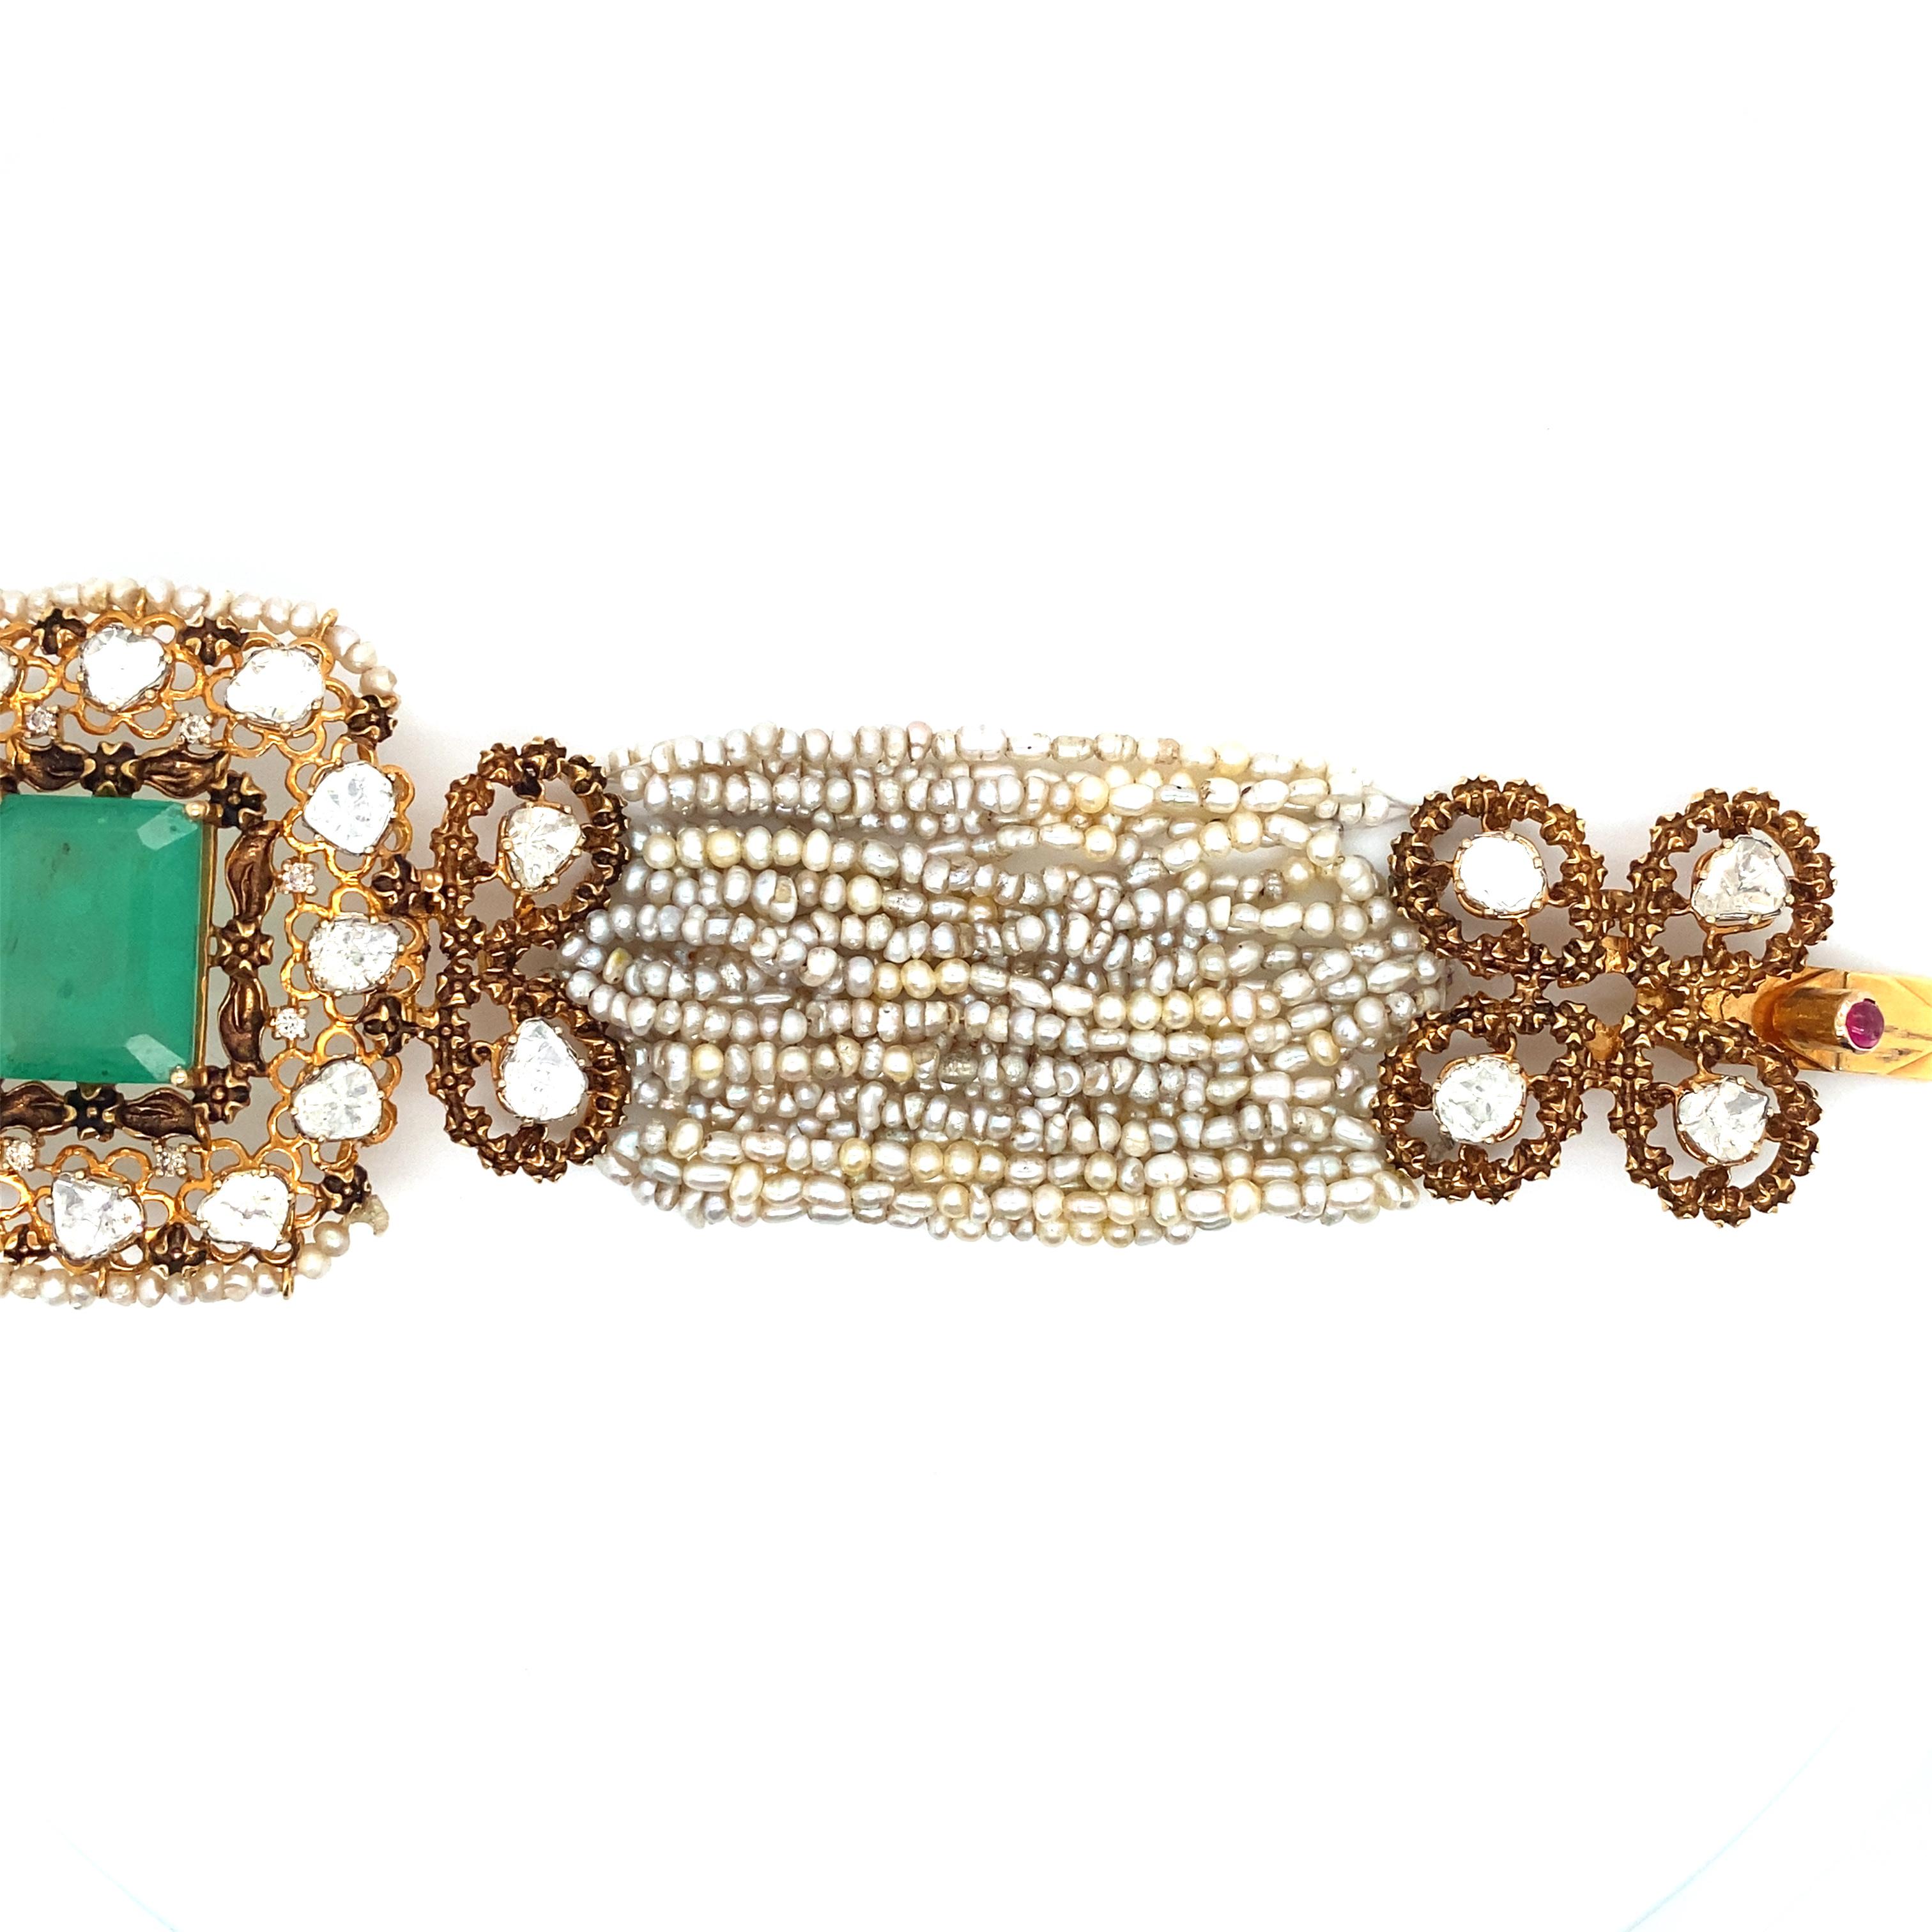 Emerald Cut Victorian Revival Seed Pearl and Emerald Bracelet in 14 Karat Gold, circa 1950s  For Sale